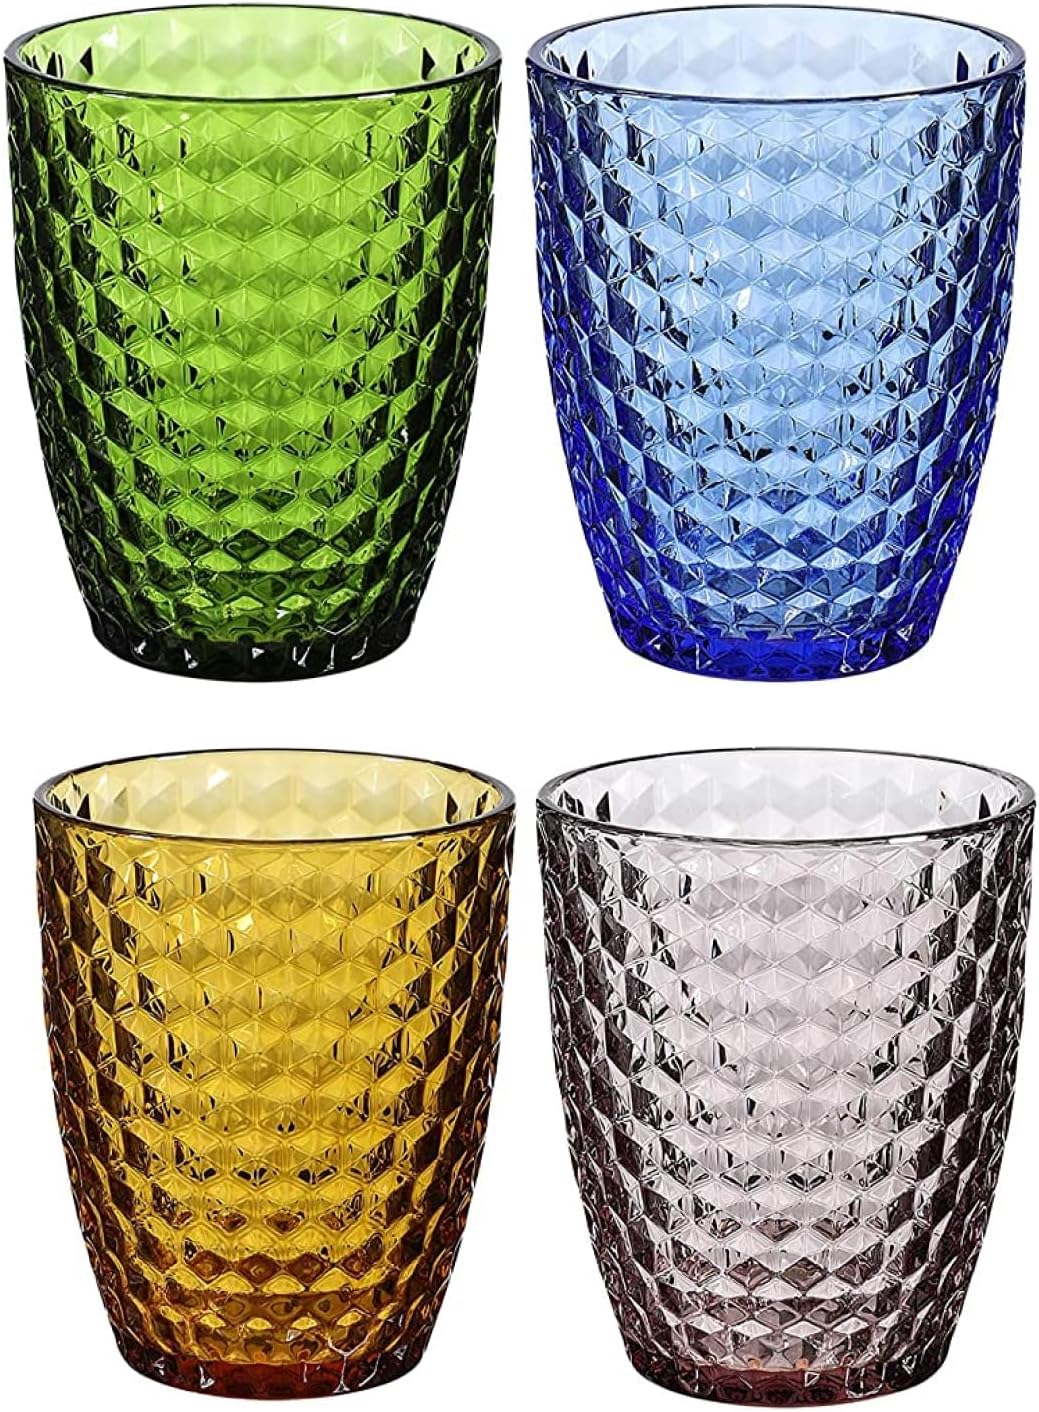 WHOLE HOUSEWARES Colored Tumblers & Water Glasses Set of 4 Multi Colors Drinking Glasses (12 OZ)